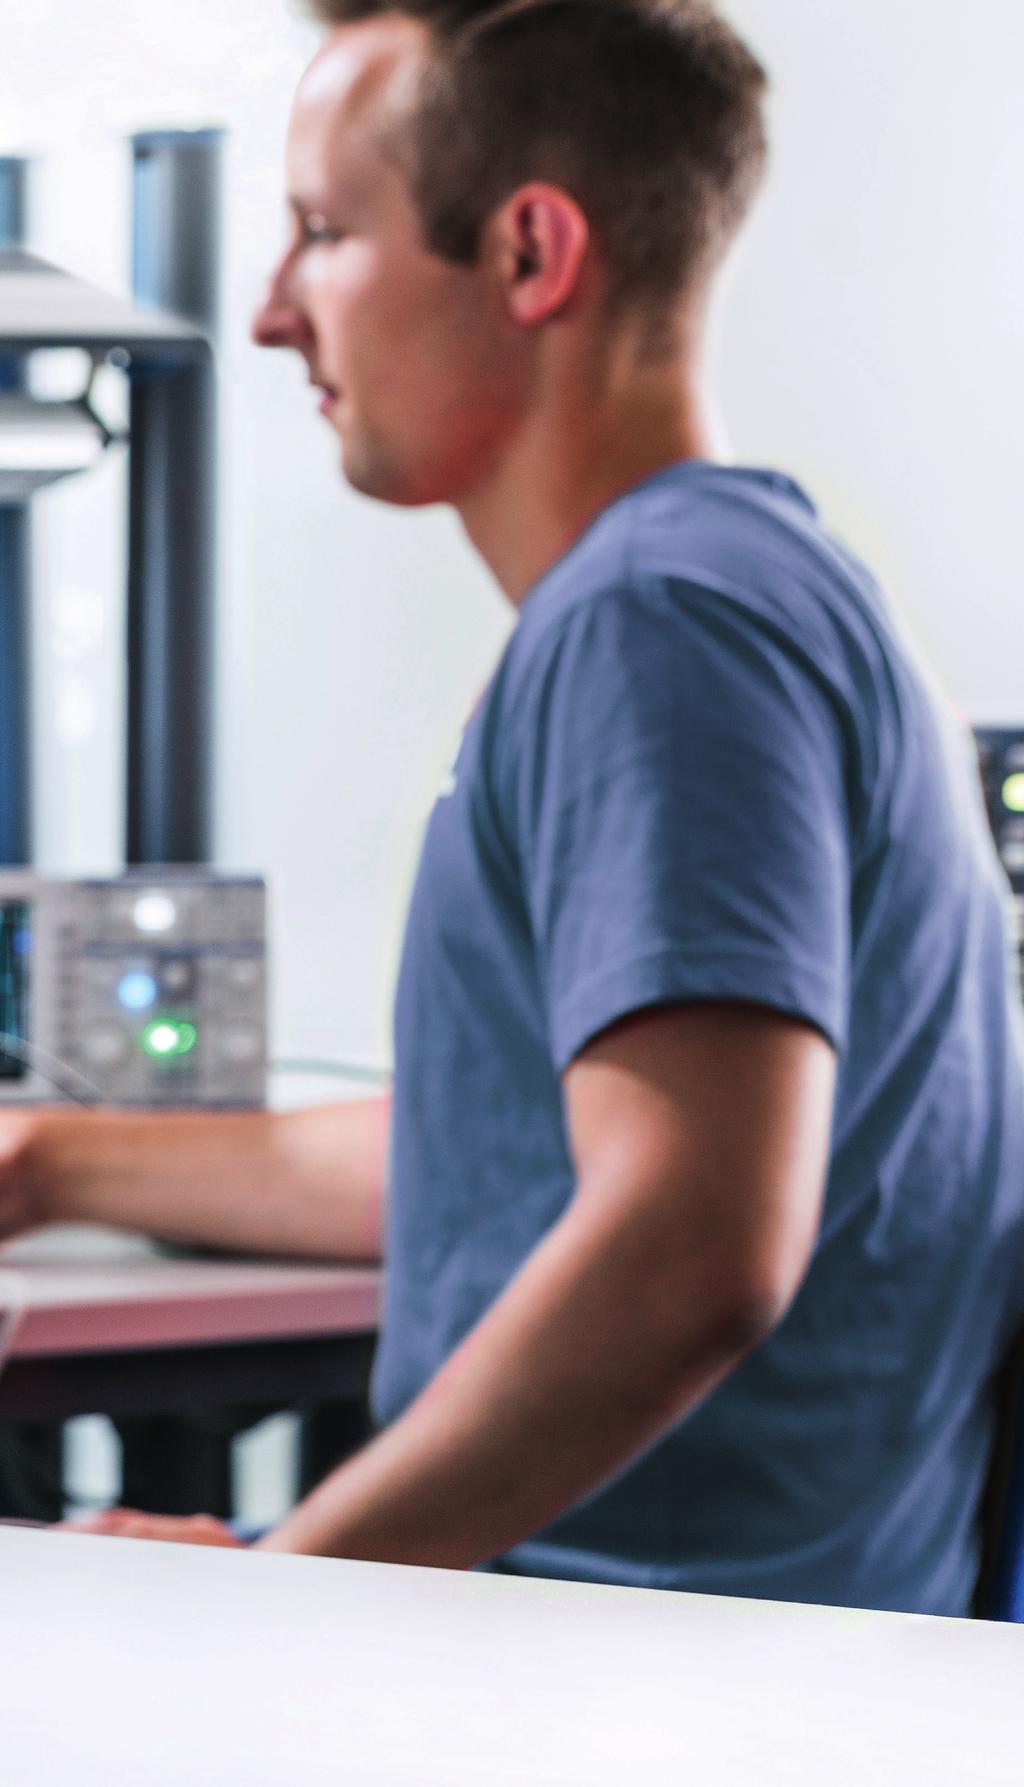 In the lab Lab oscilloscope performance Safe measurements on power electronics When debugging embedded devices in the lab or analyzing complex problems in the field, the R&S Scope Rider offers the